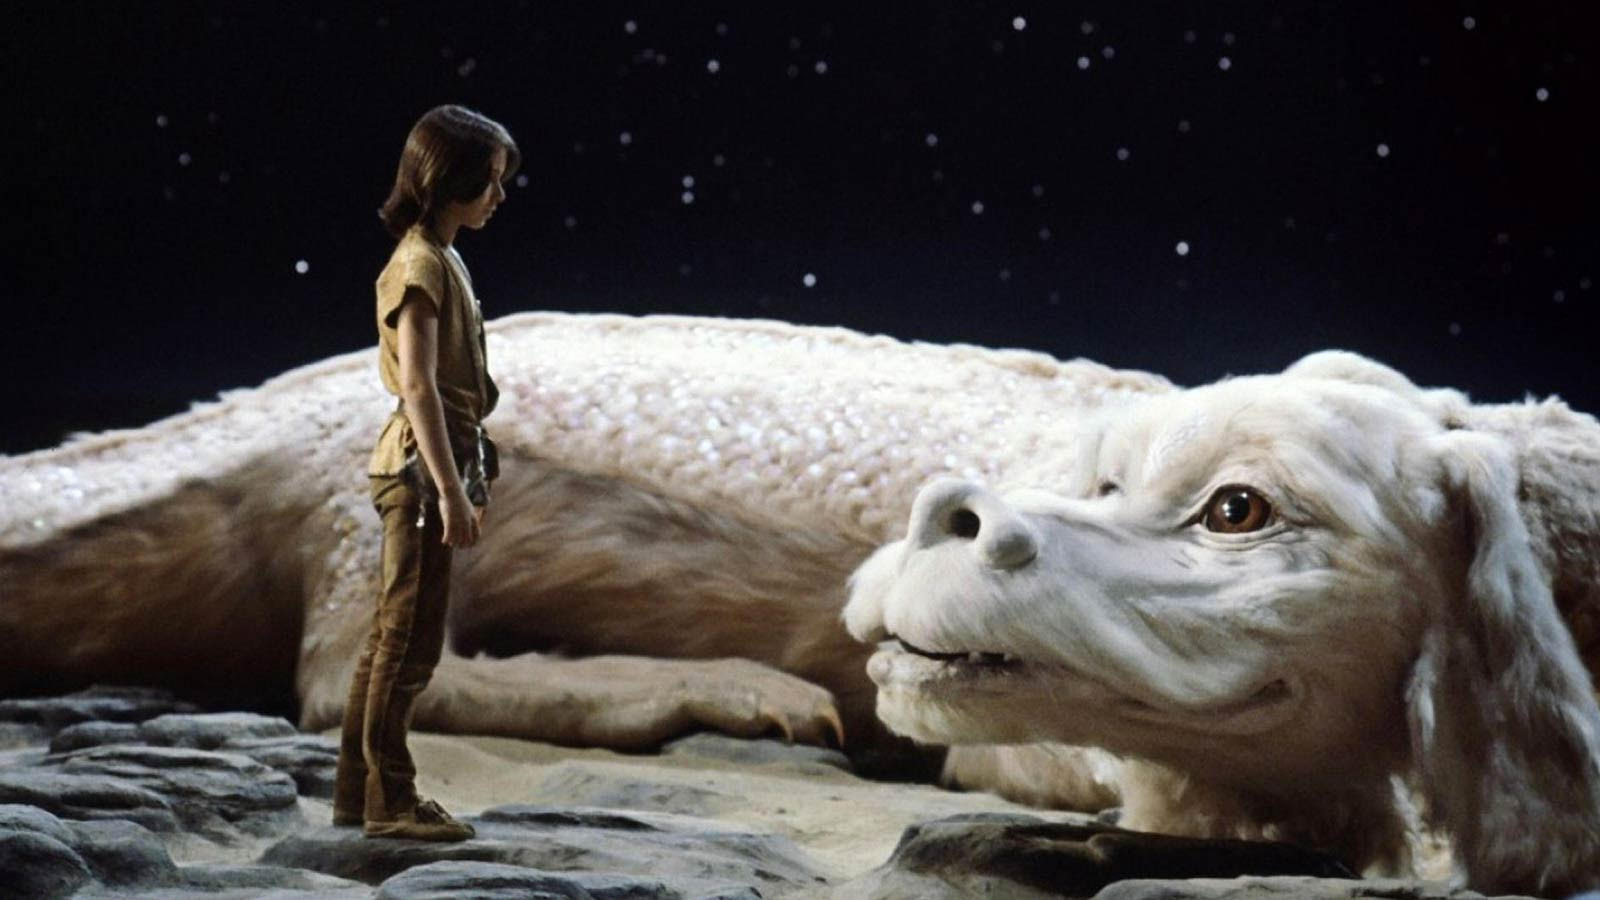 A bidding war has erupted over the rights to the neverending story